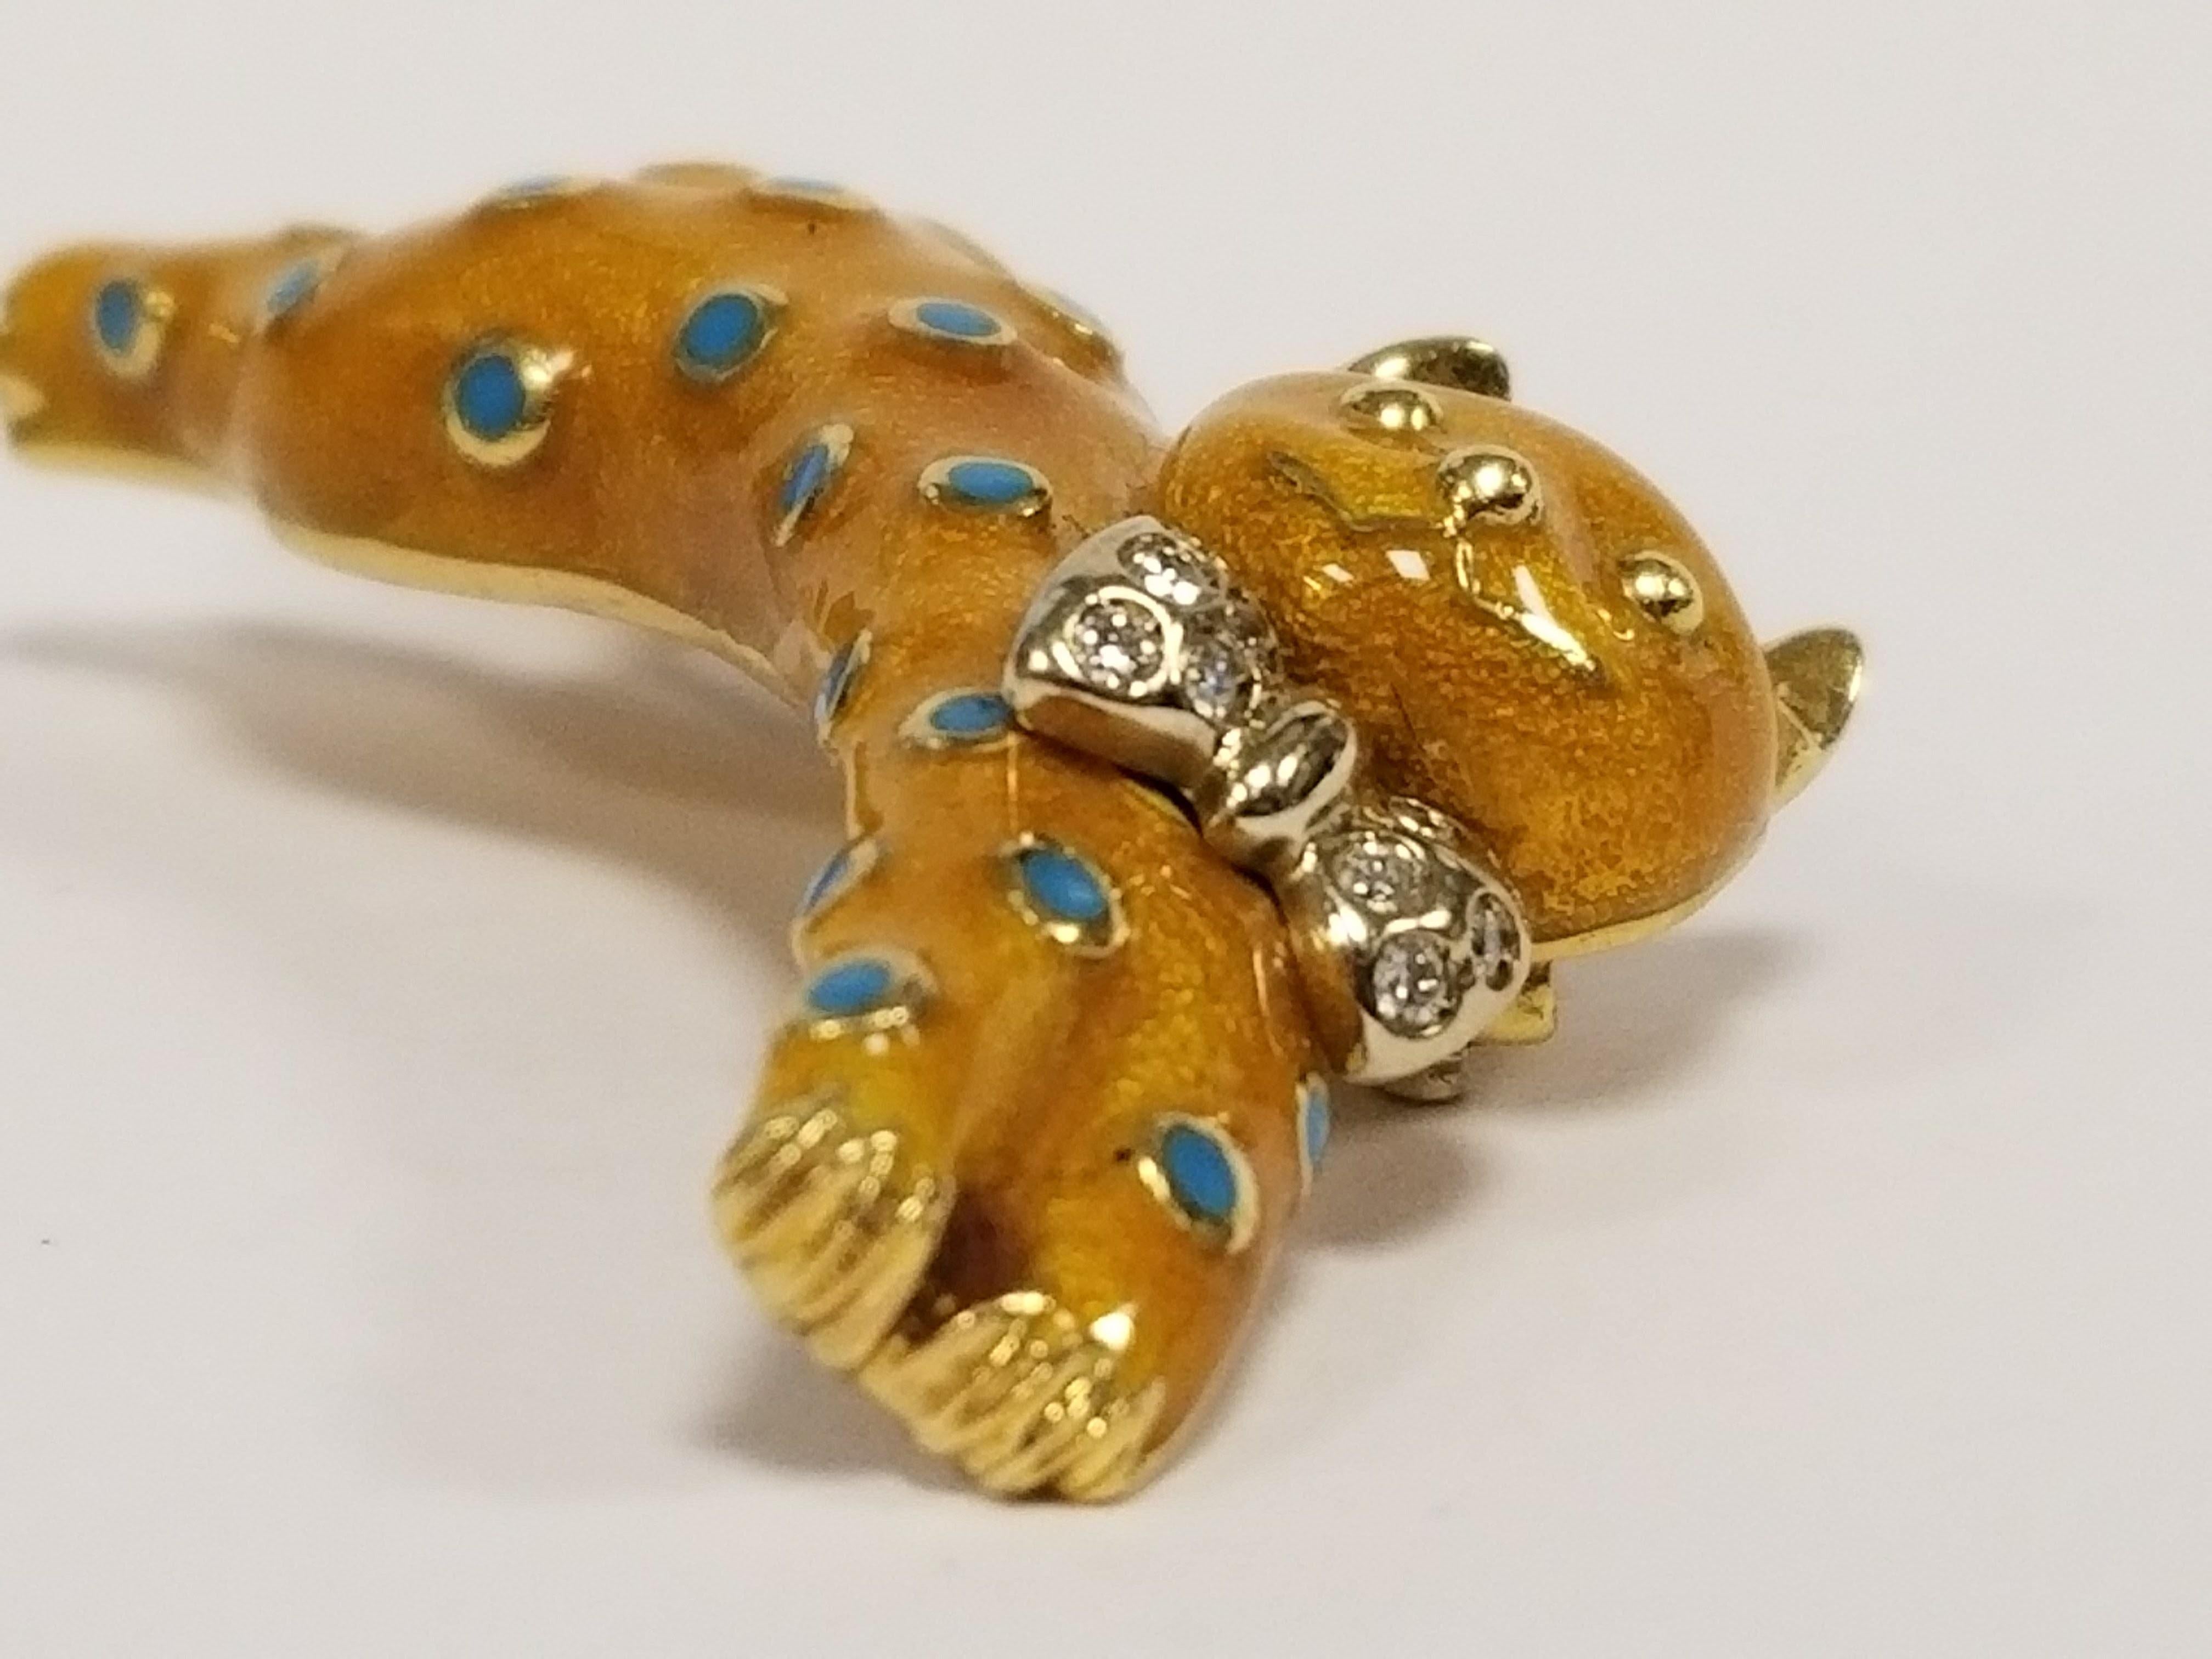 An Italian Estate 18 karat gold and enamel brooch with diamonds by Asprey London. The brooch has 10 round diamonds with an approximate total weight of .20 carats. The  golden enamel cat has sky blue enamel spots. Circa Estate.

Signed, 